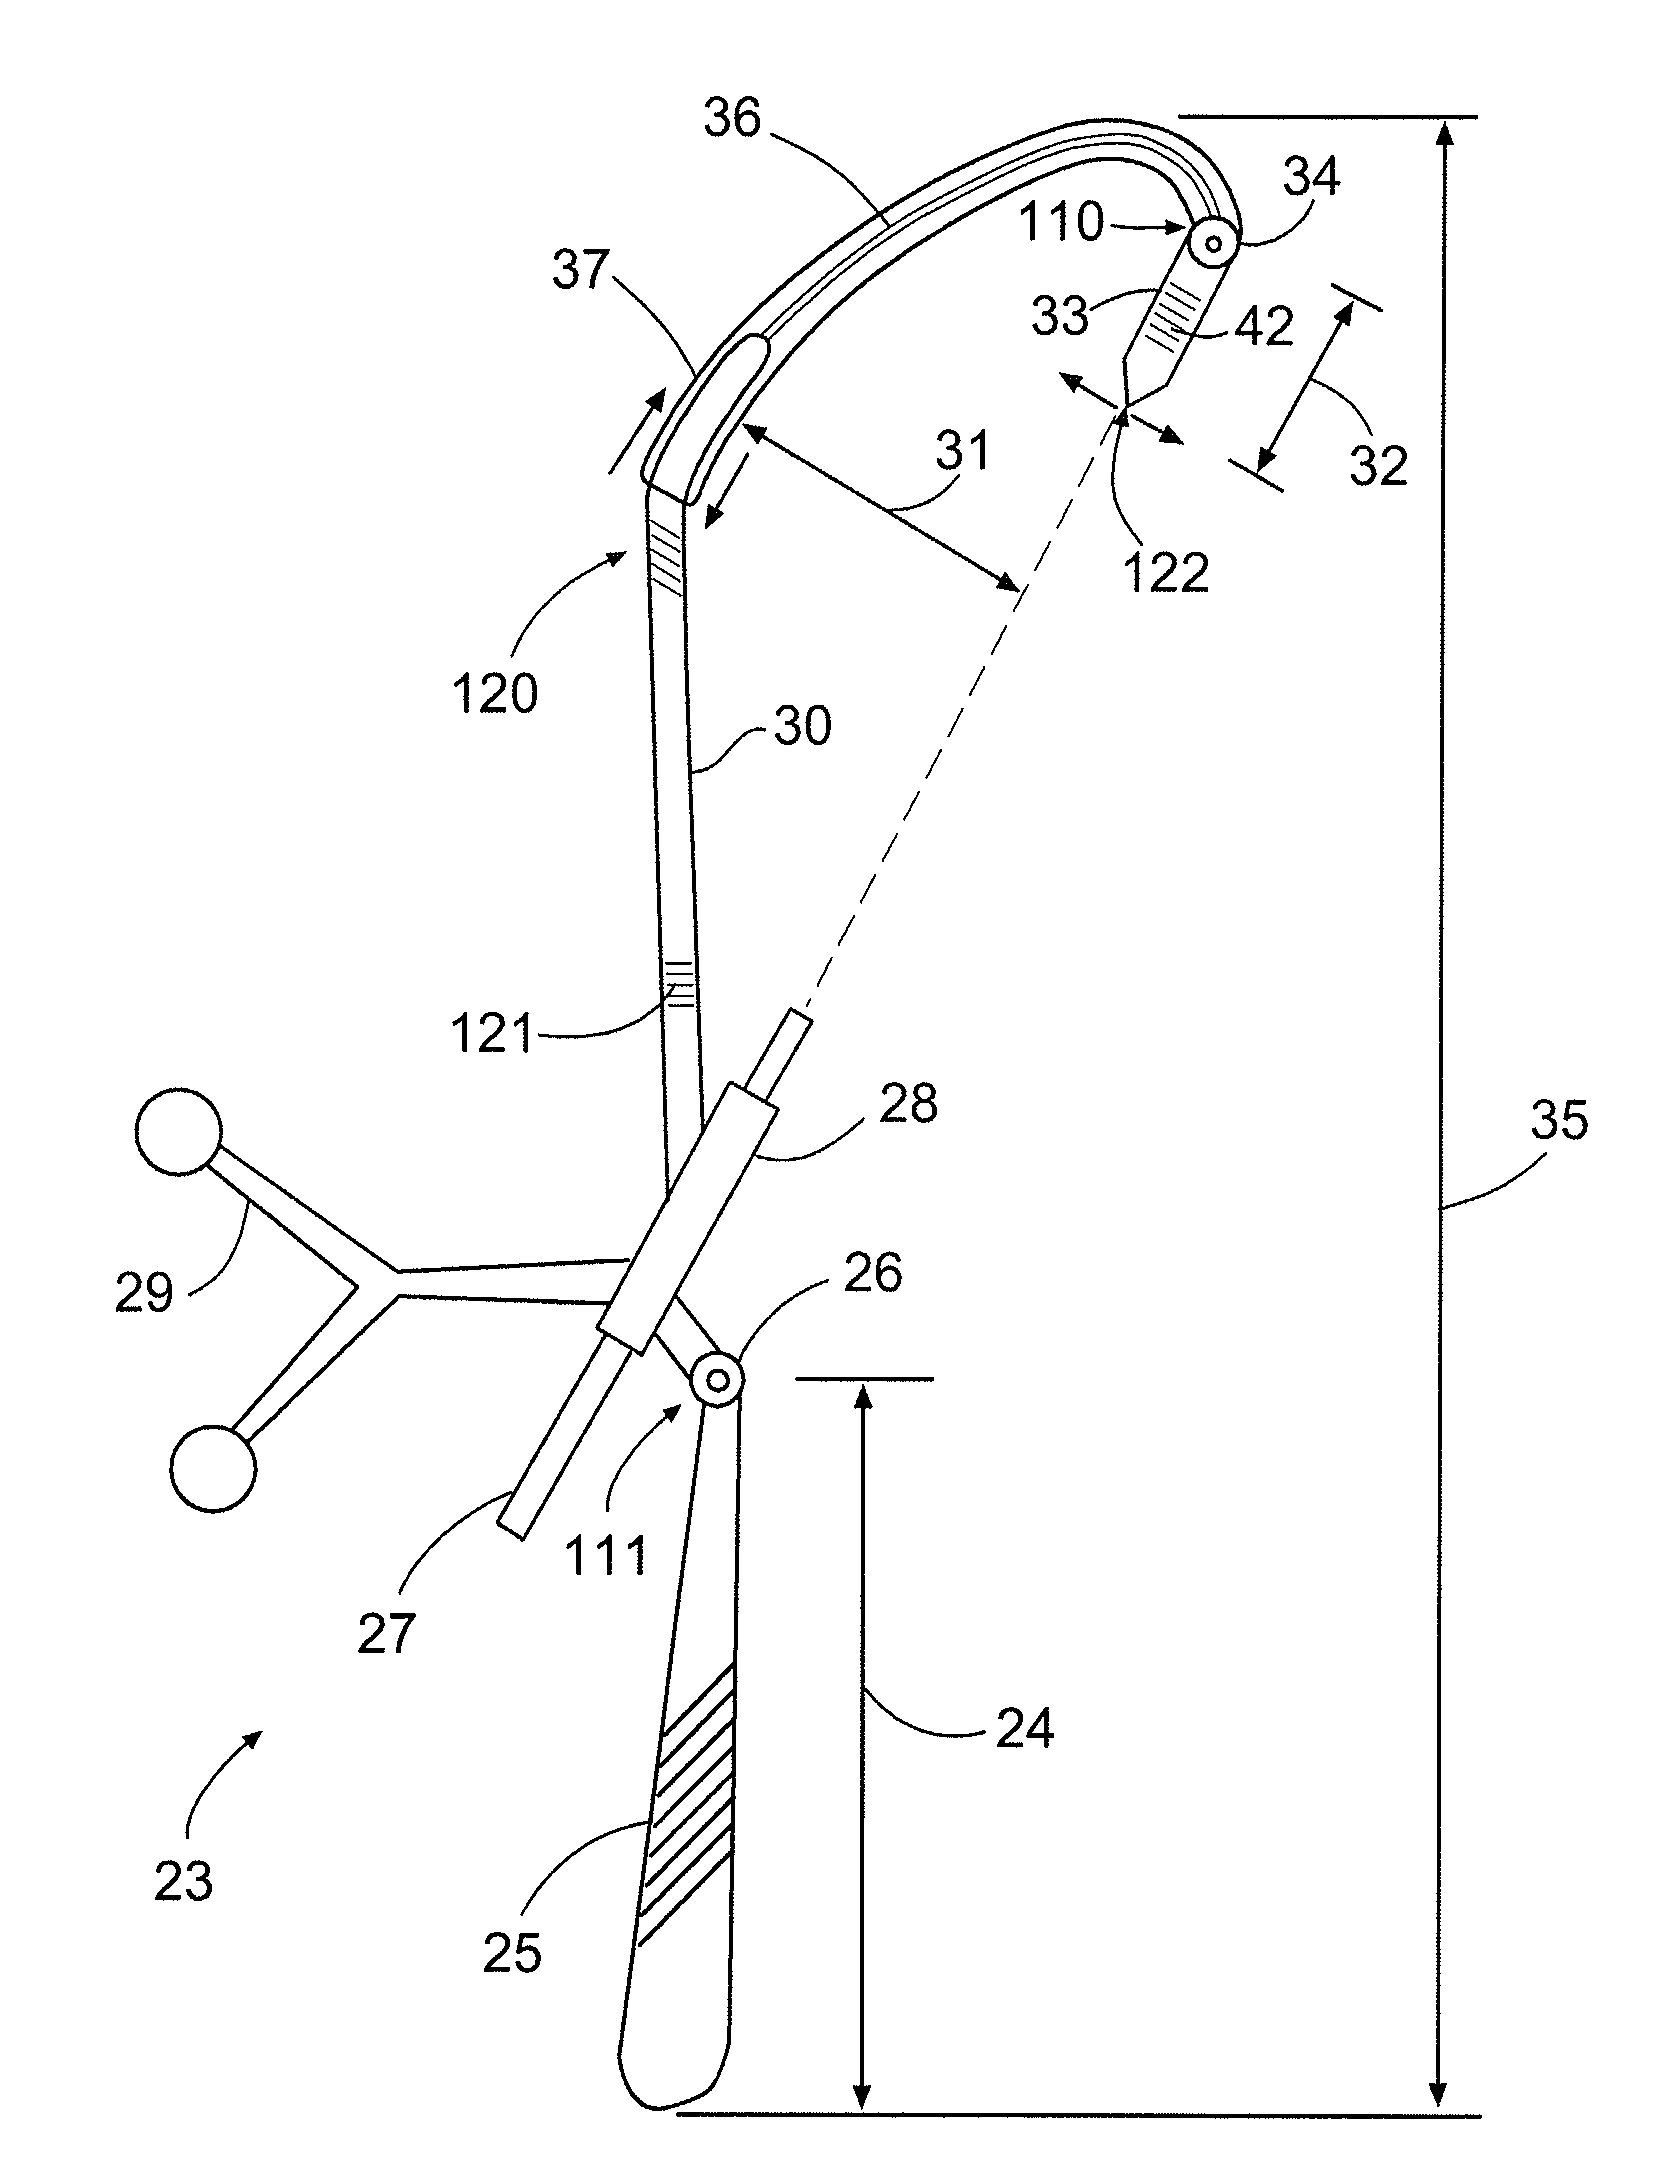 Method and Apparatus for Arthroscopic Assisted Arthroplasty of the Hip Joint